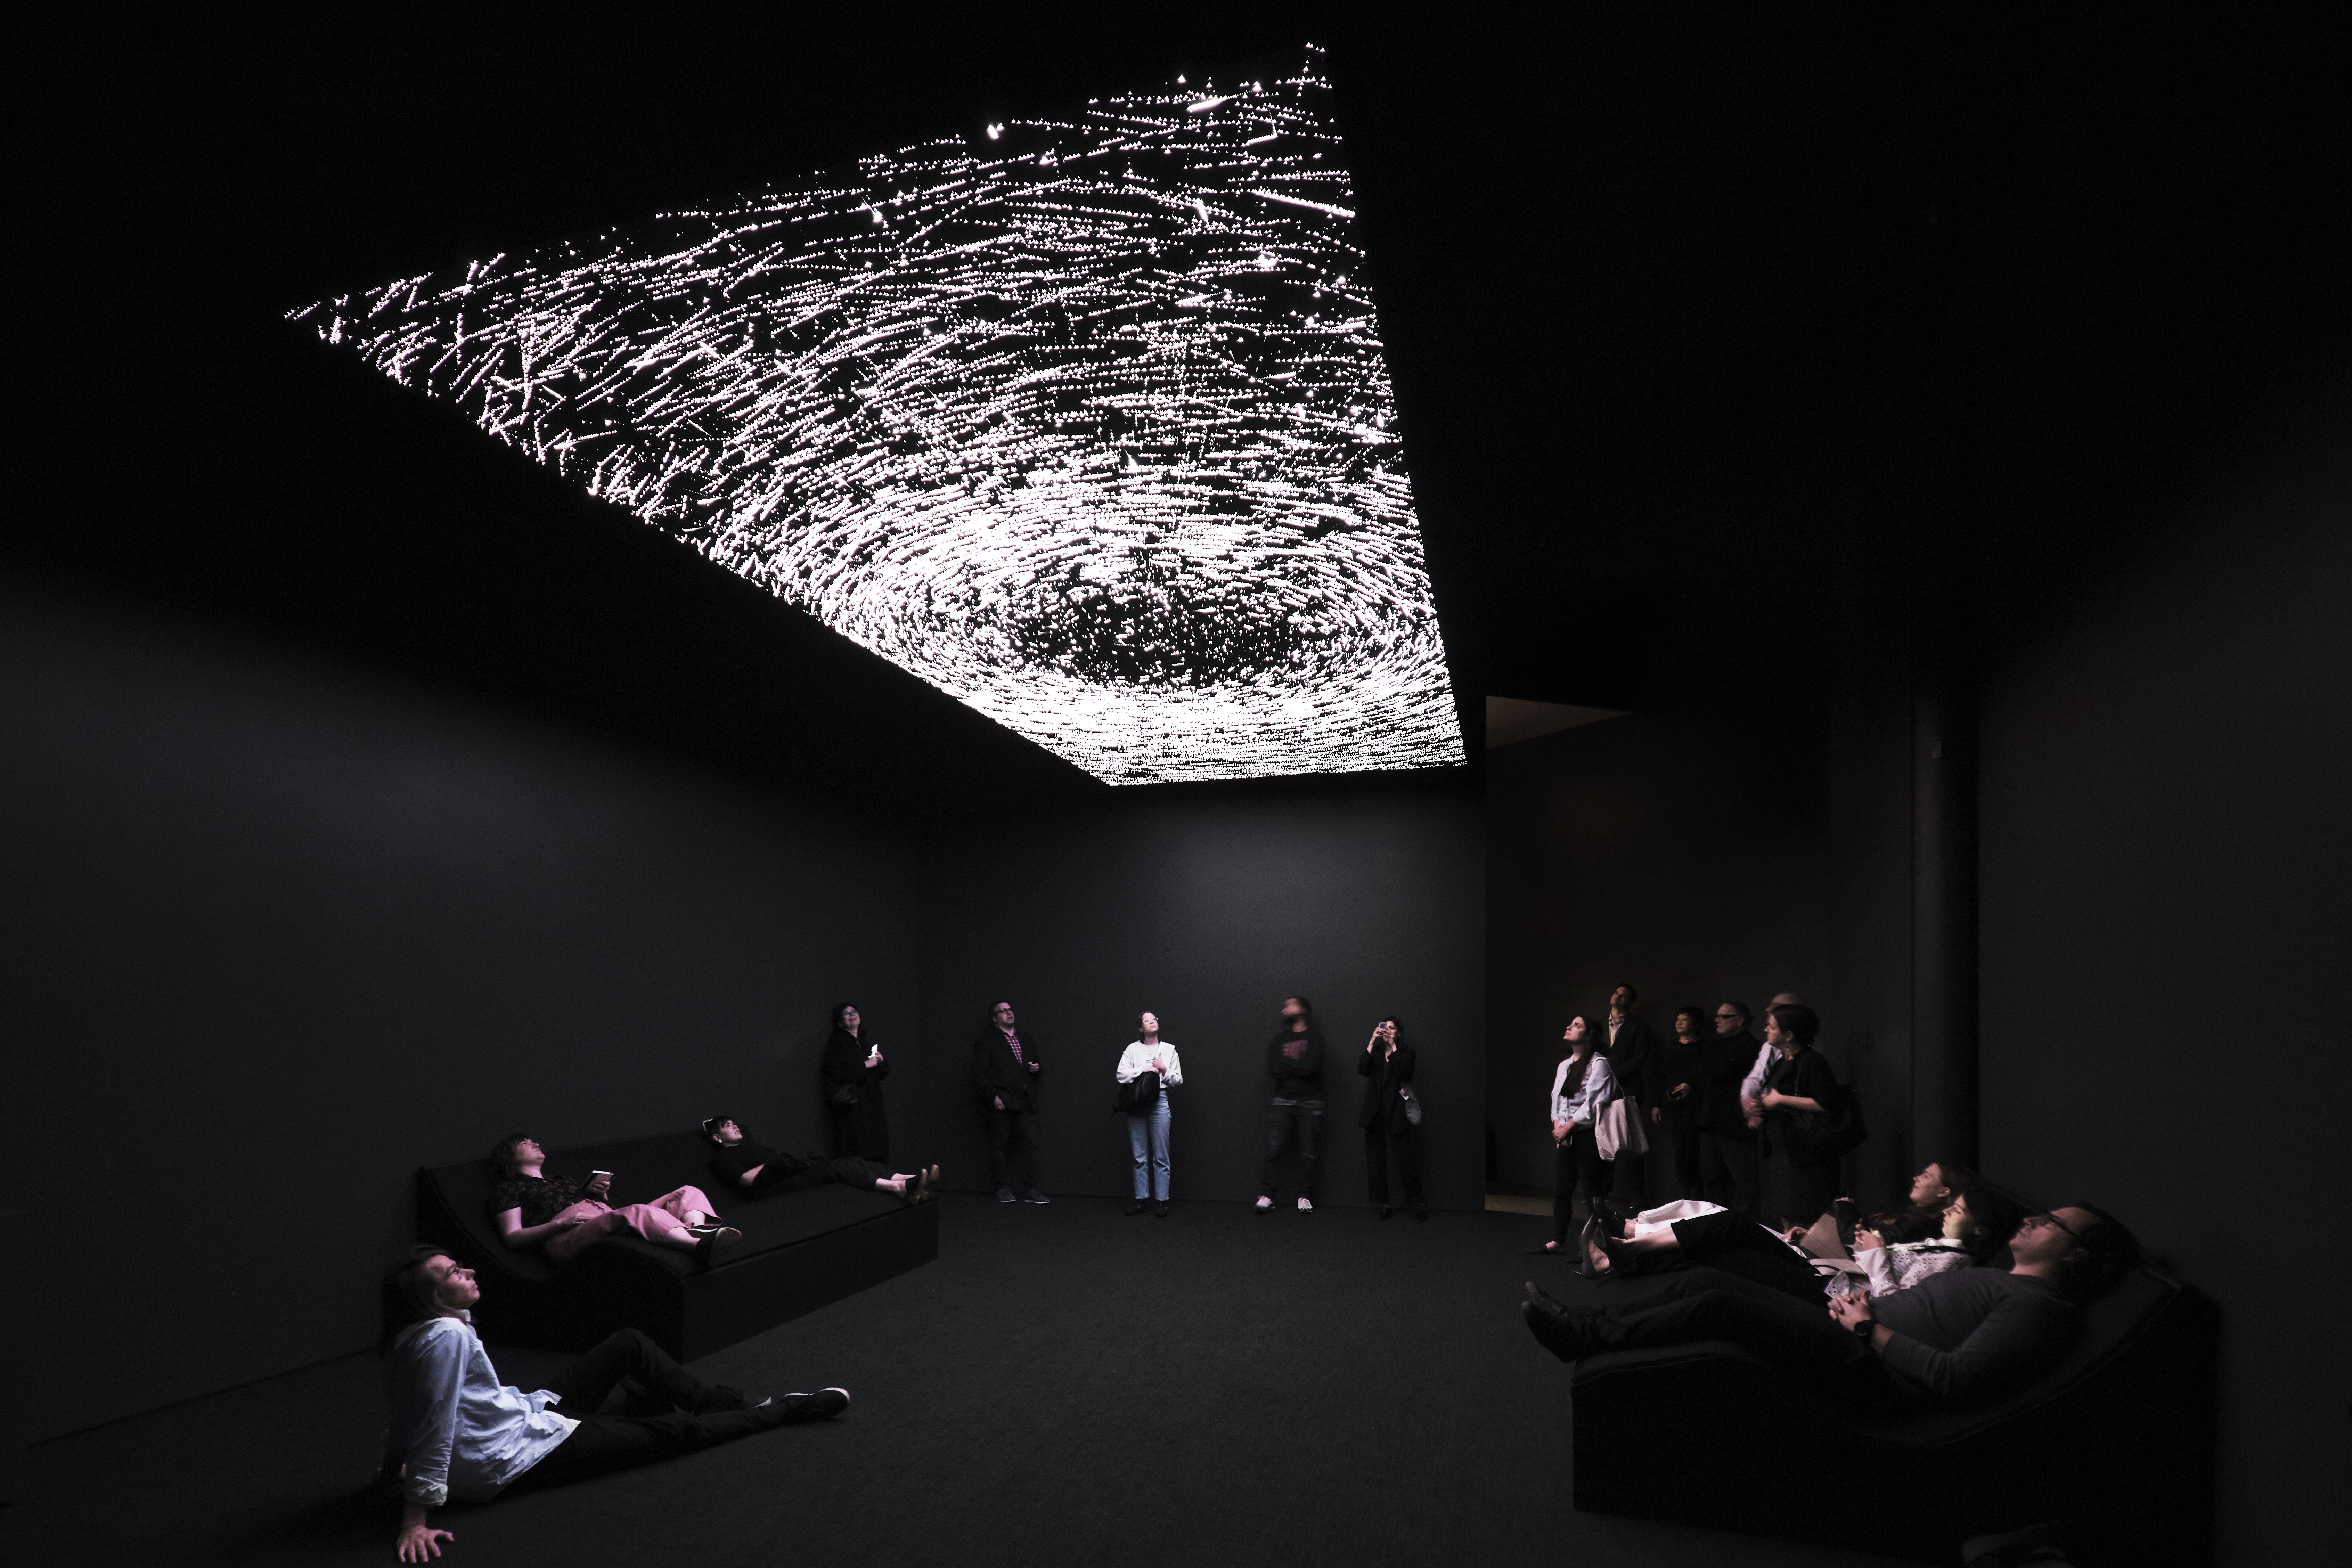 People gathered in a dark room look at an LED ceiling installation that looks like constellations